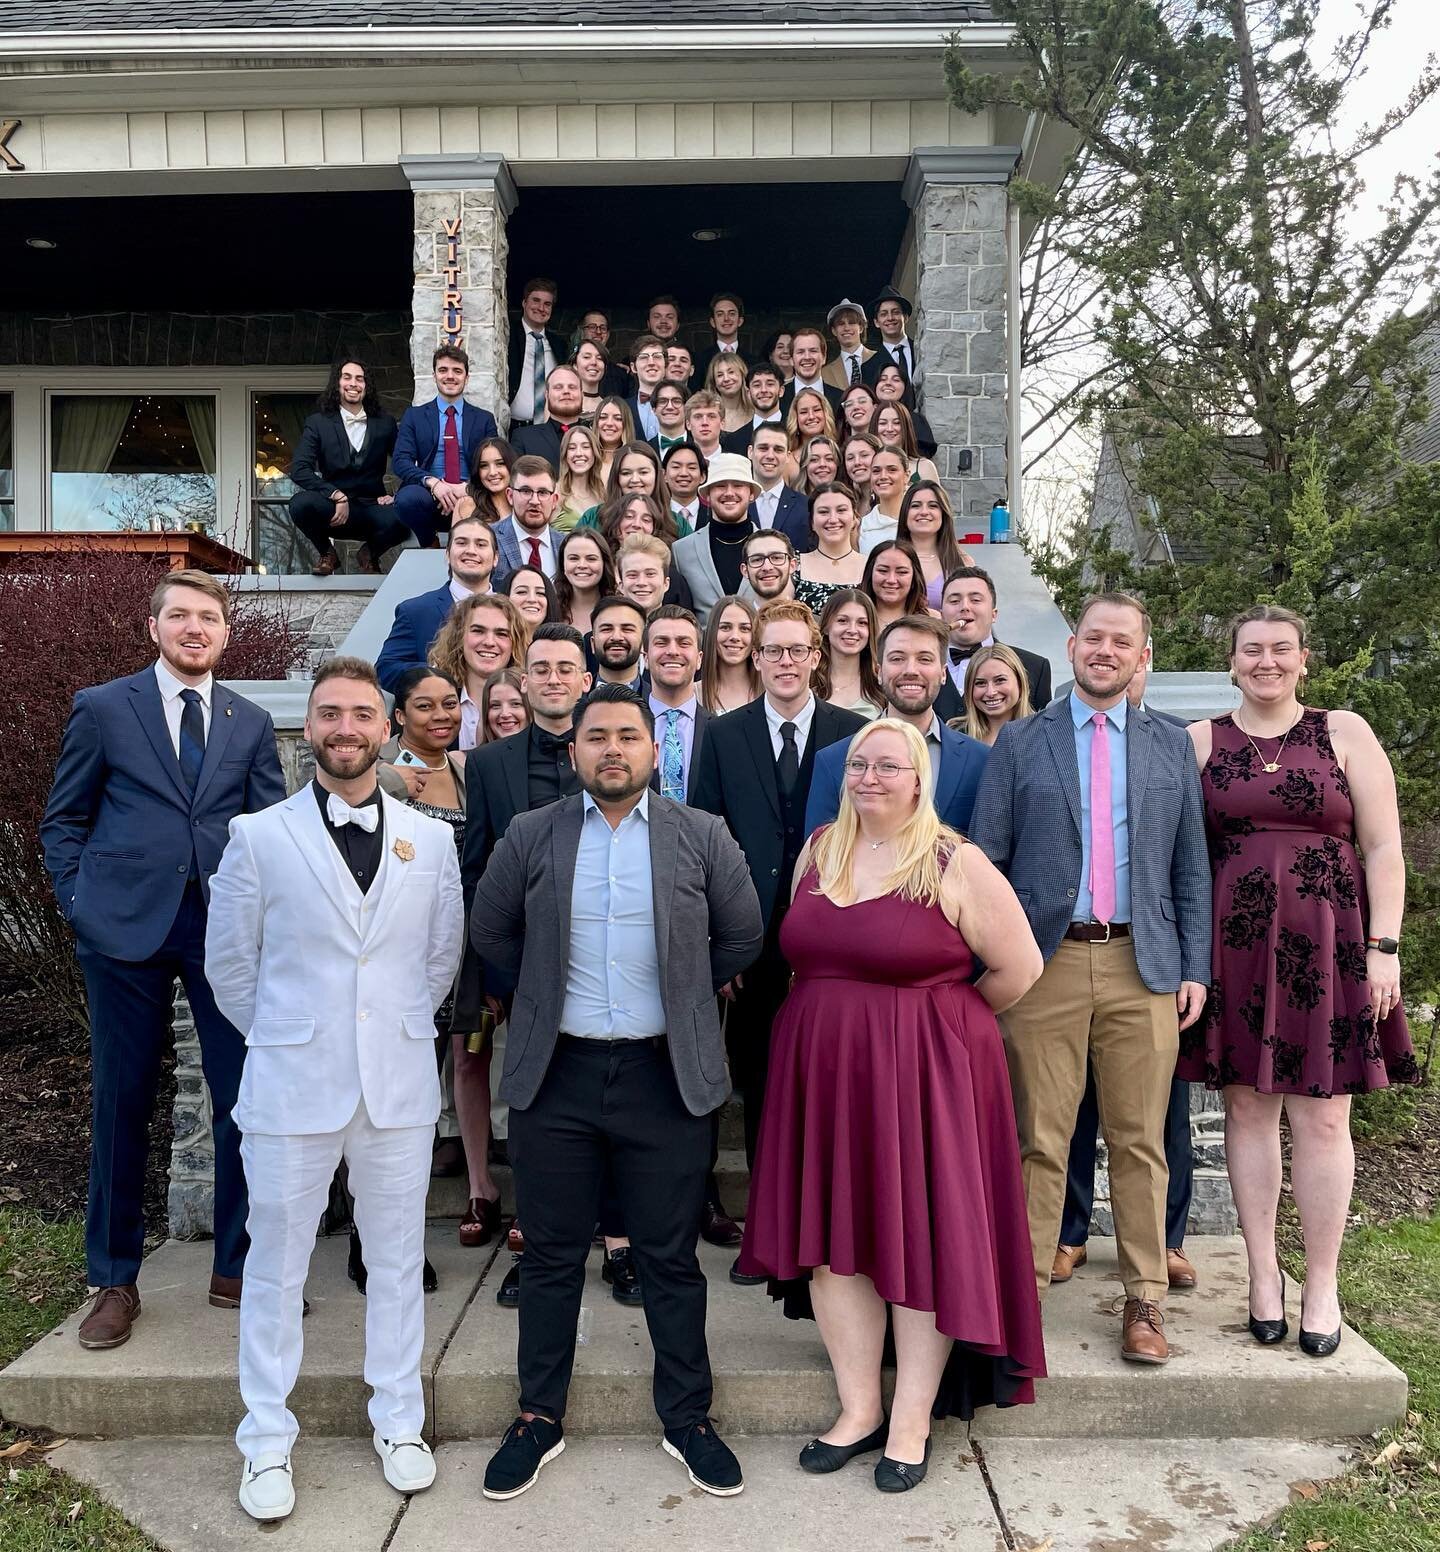 Happy Founder&rsquo;s Day from the Vitruvius Chapter! We got to celebrate this weekend at our annual White Rose with active and alumni brothers. With 58 active brothers, we are the largest our chapter has ever been! Here&rsquo;s to 108 years of Alpha